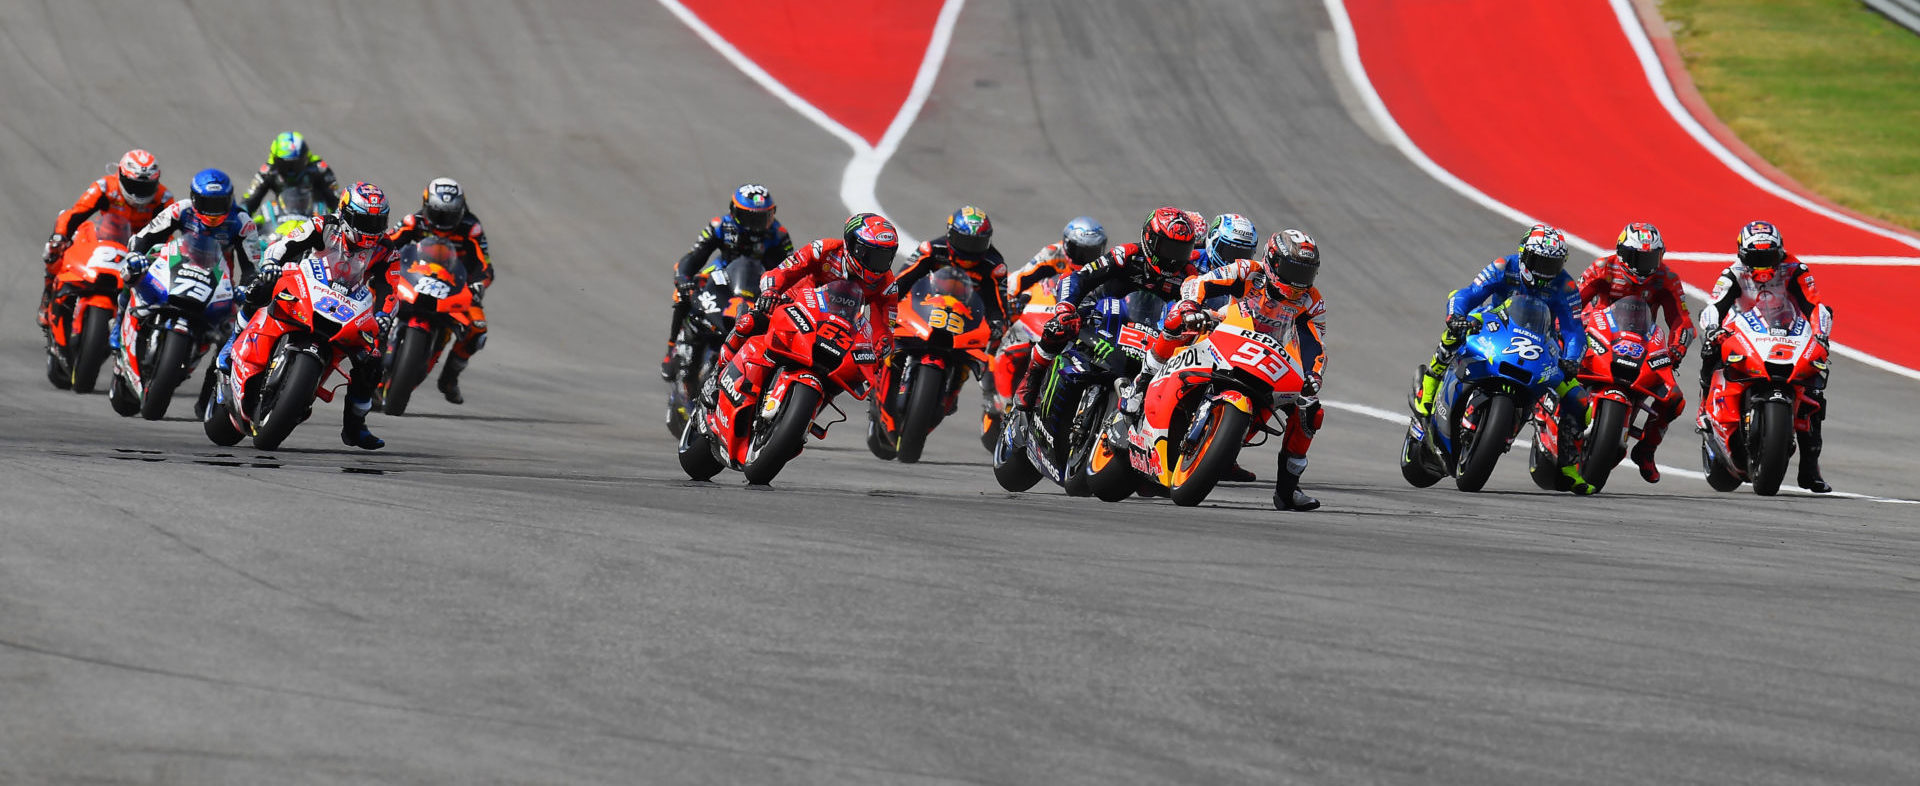 The start of the MotoGP race at COTA. Photo courtesy Michelin.